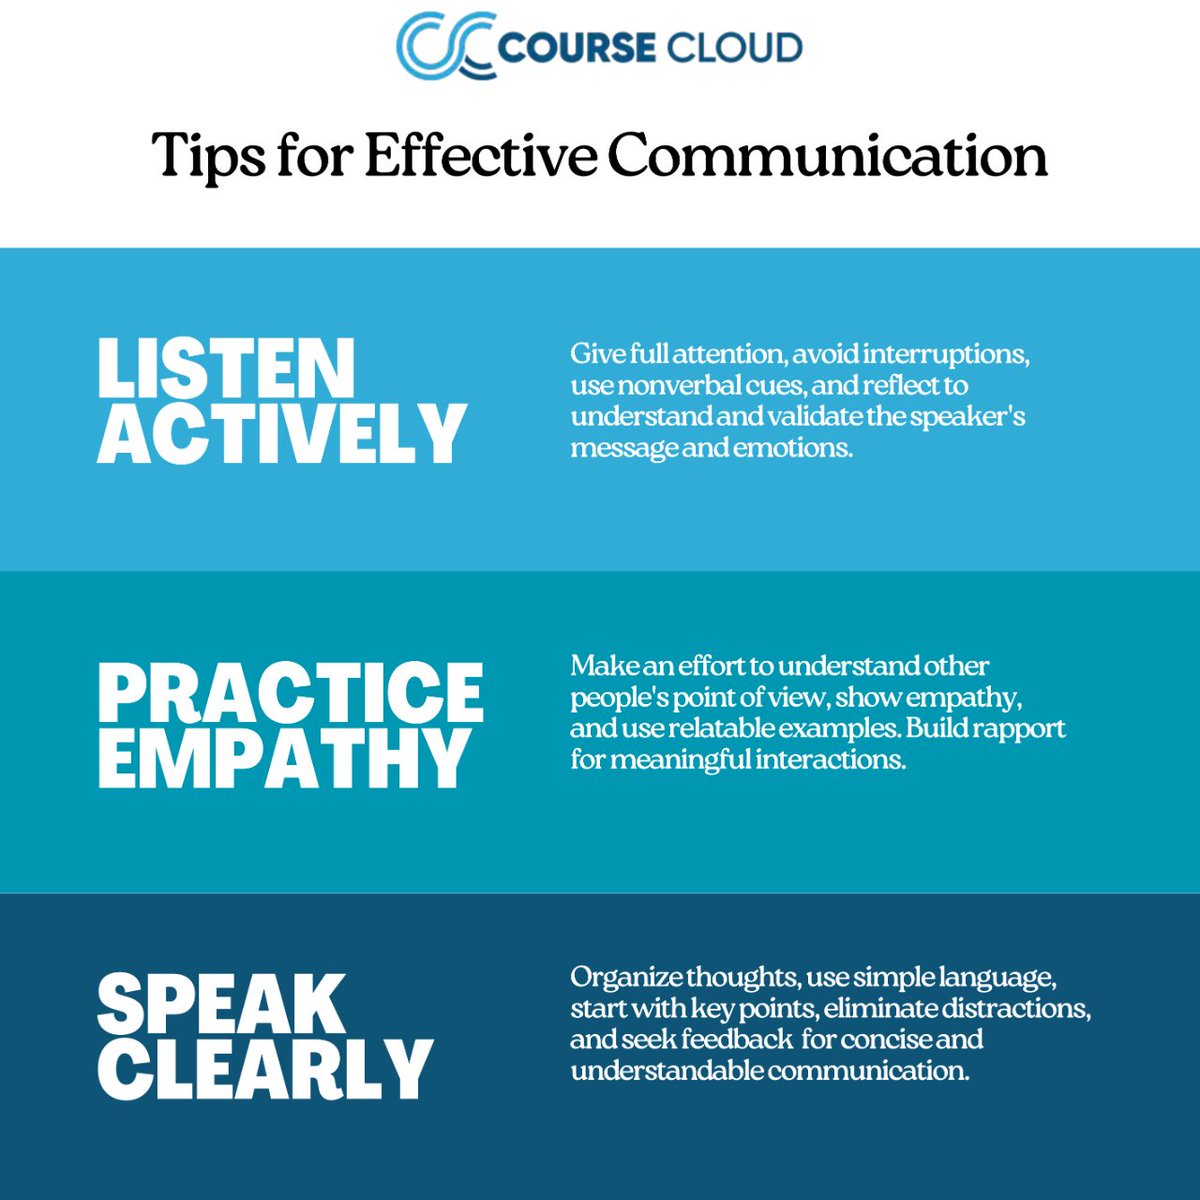 Speak, connect, succeed with Course Cloud's Communication Skills Masterclass! Empower your voice, transform your future. Begin your journey to impactful communication now!
#SpeakWithImpact #CourseCloud #CommunicationMastery #FutureReadySkills